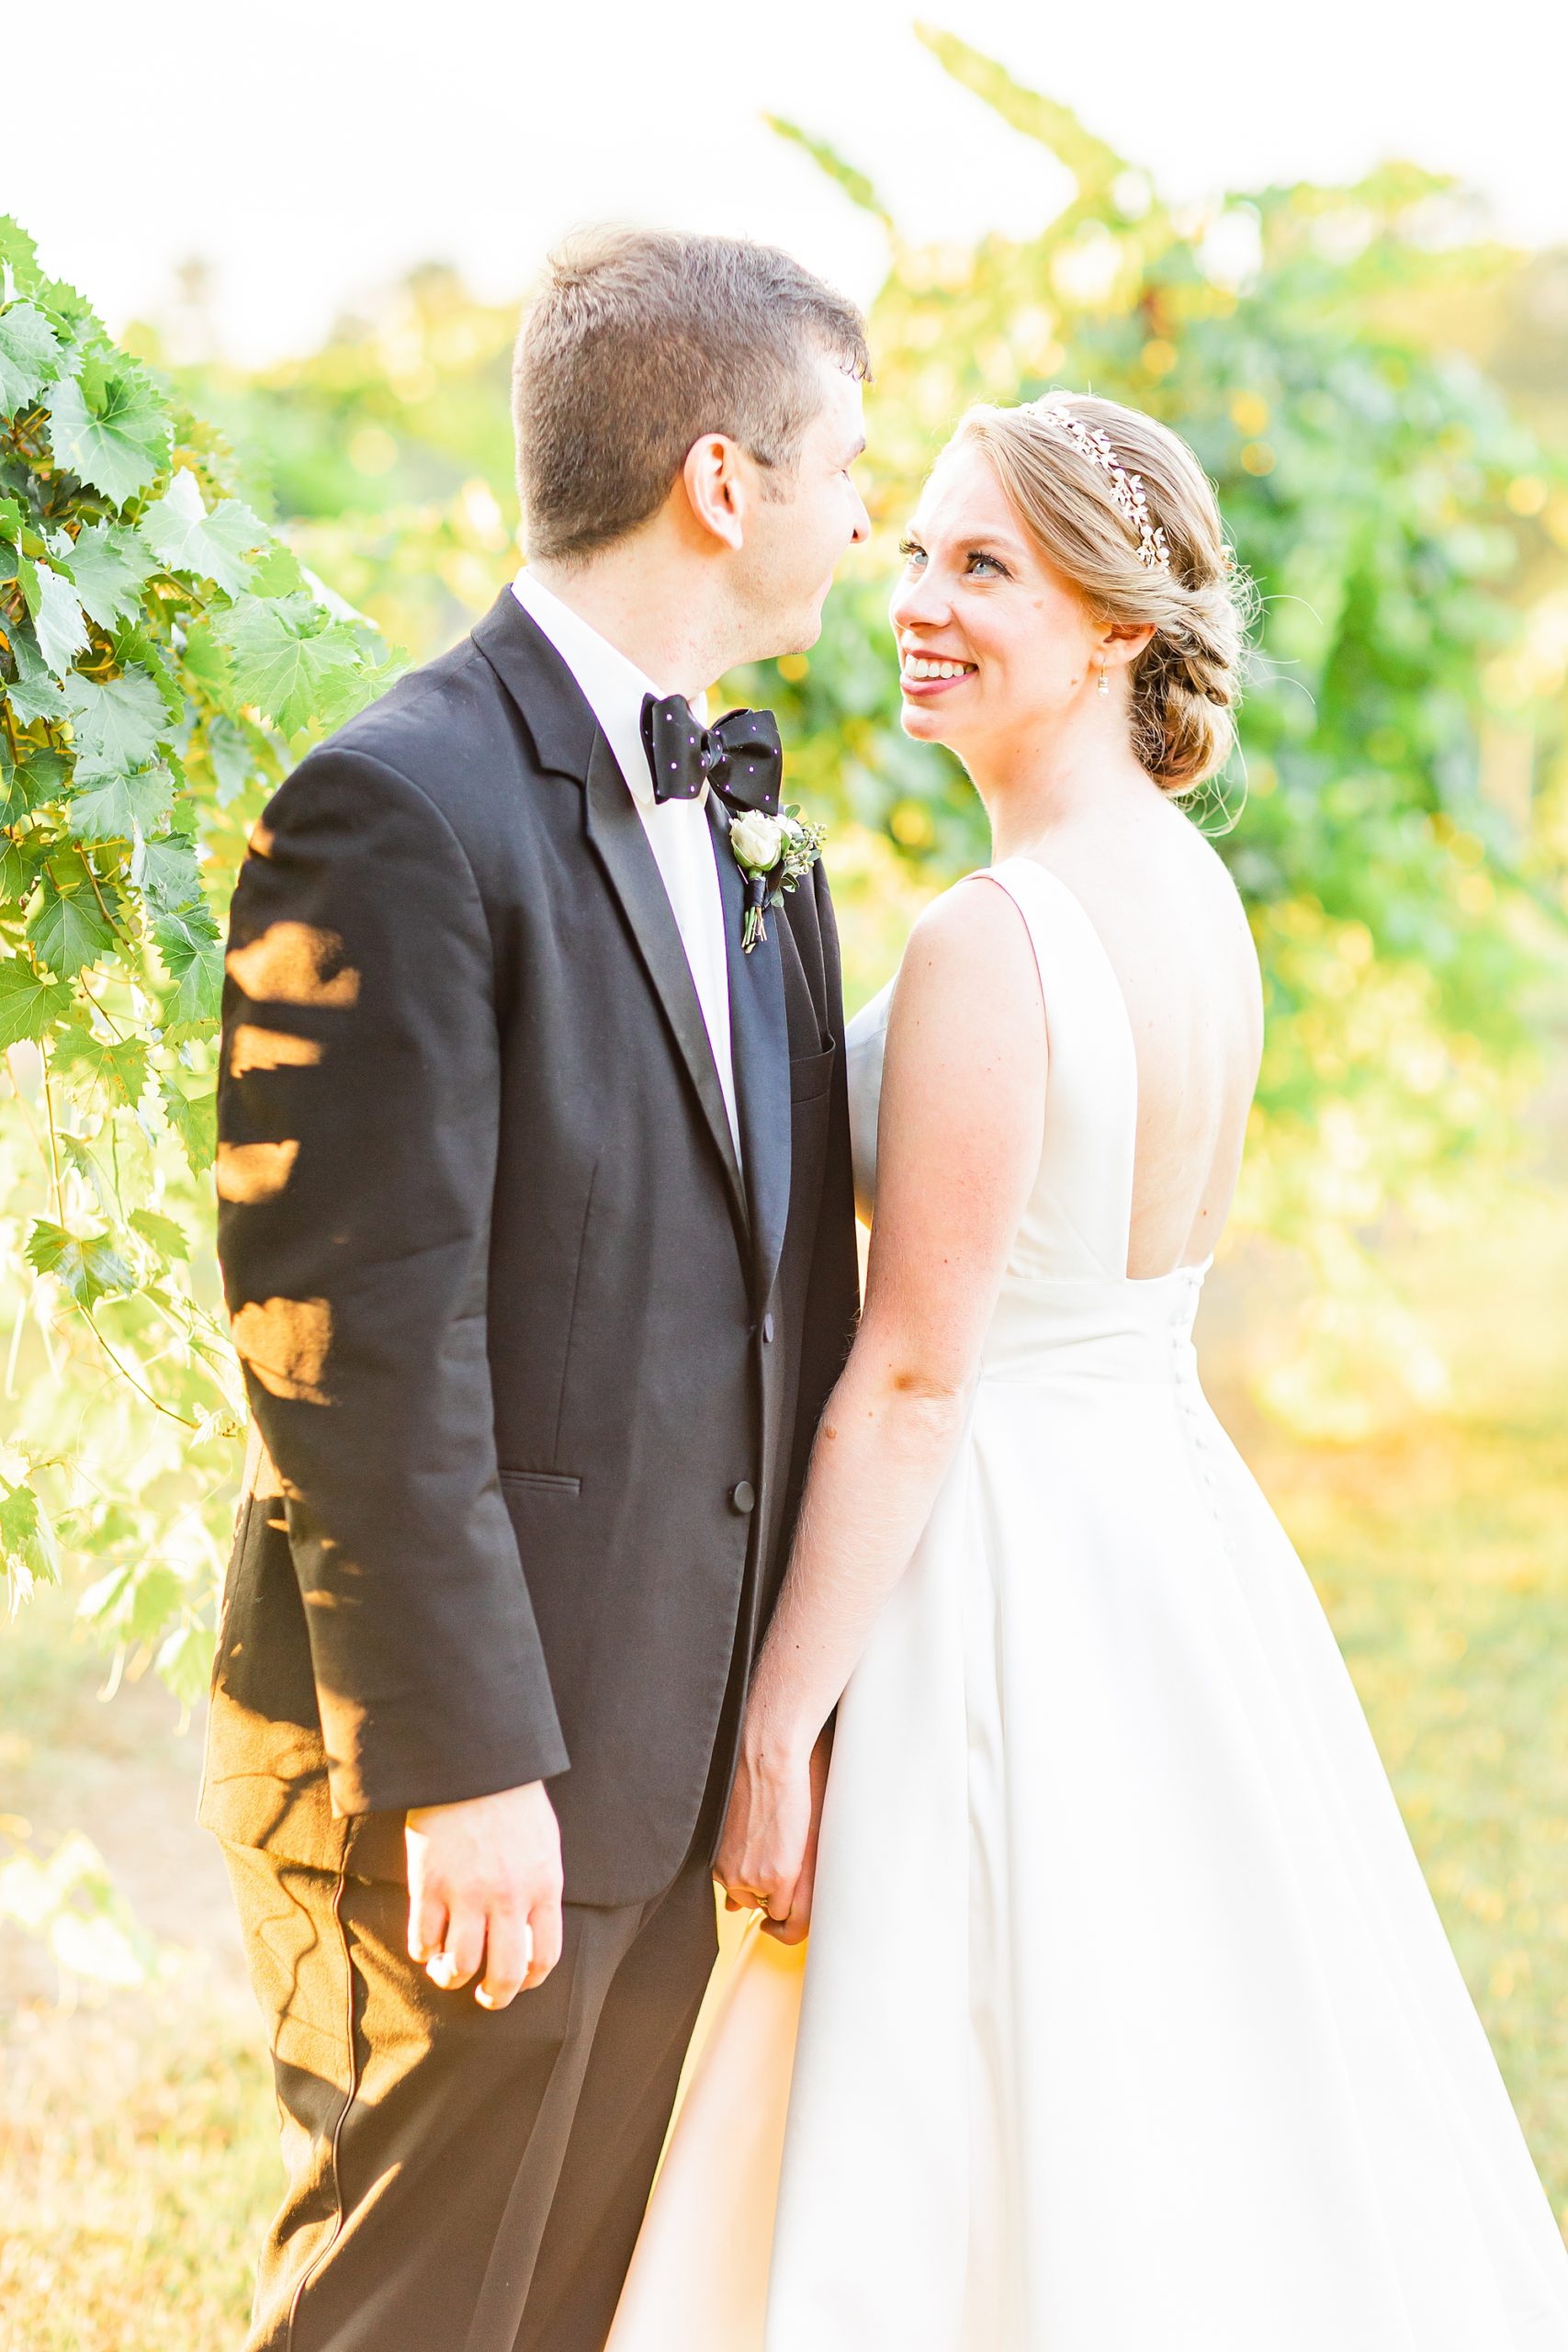 bride smiles up at groom during photos in vines